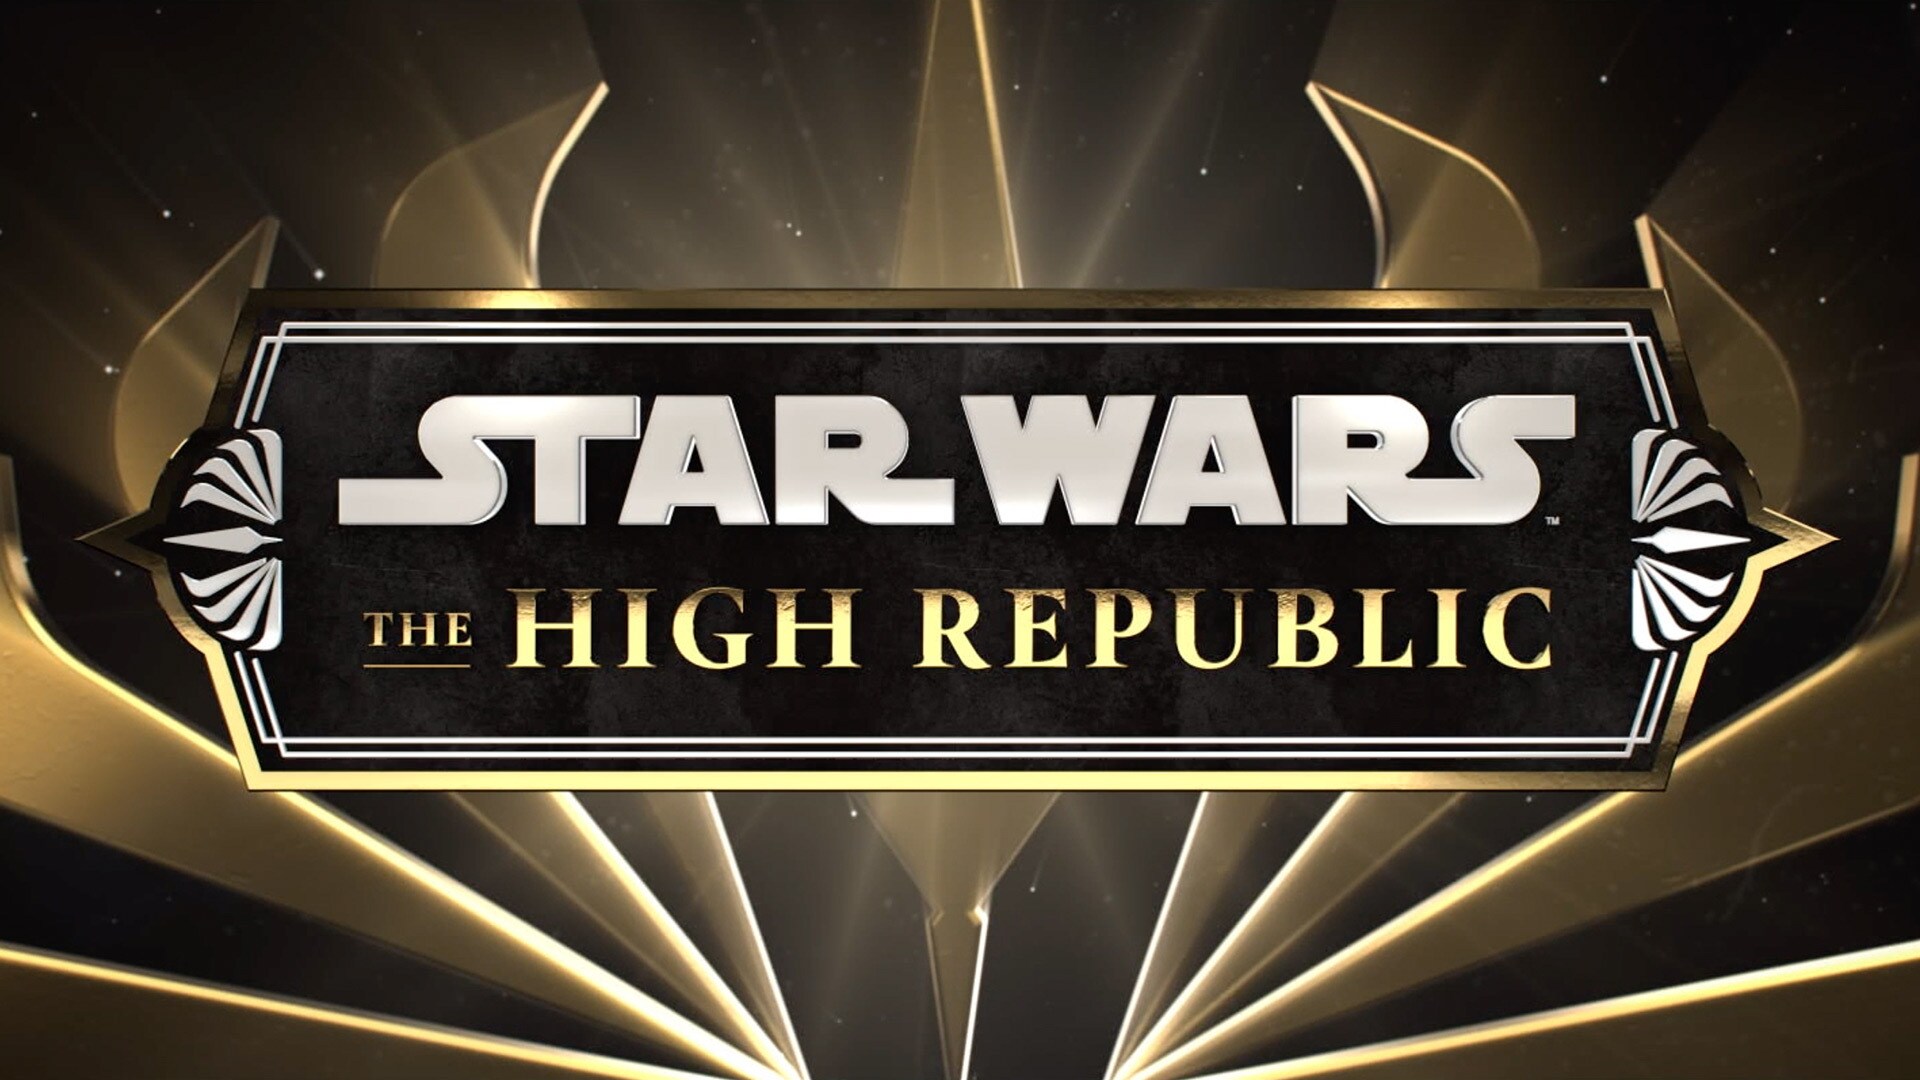 Star Wars: The High Republic Launch Event